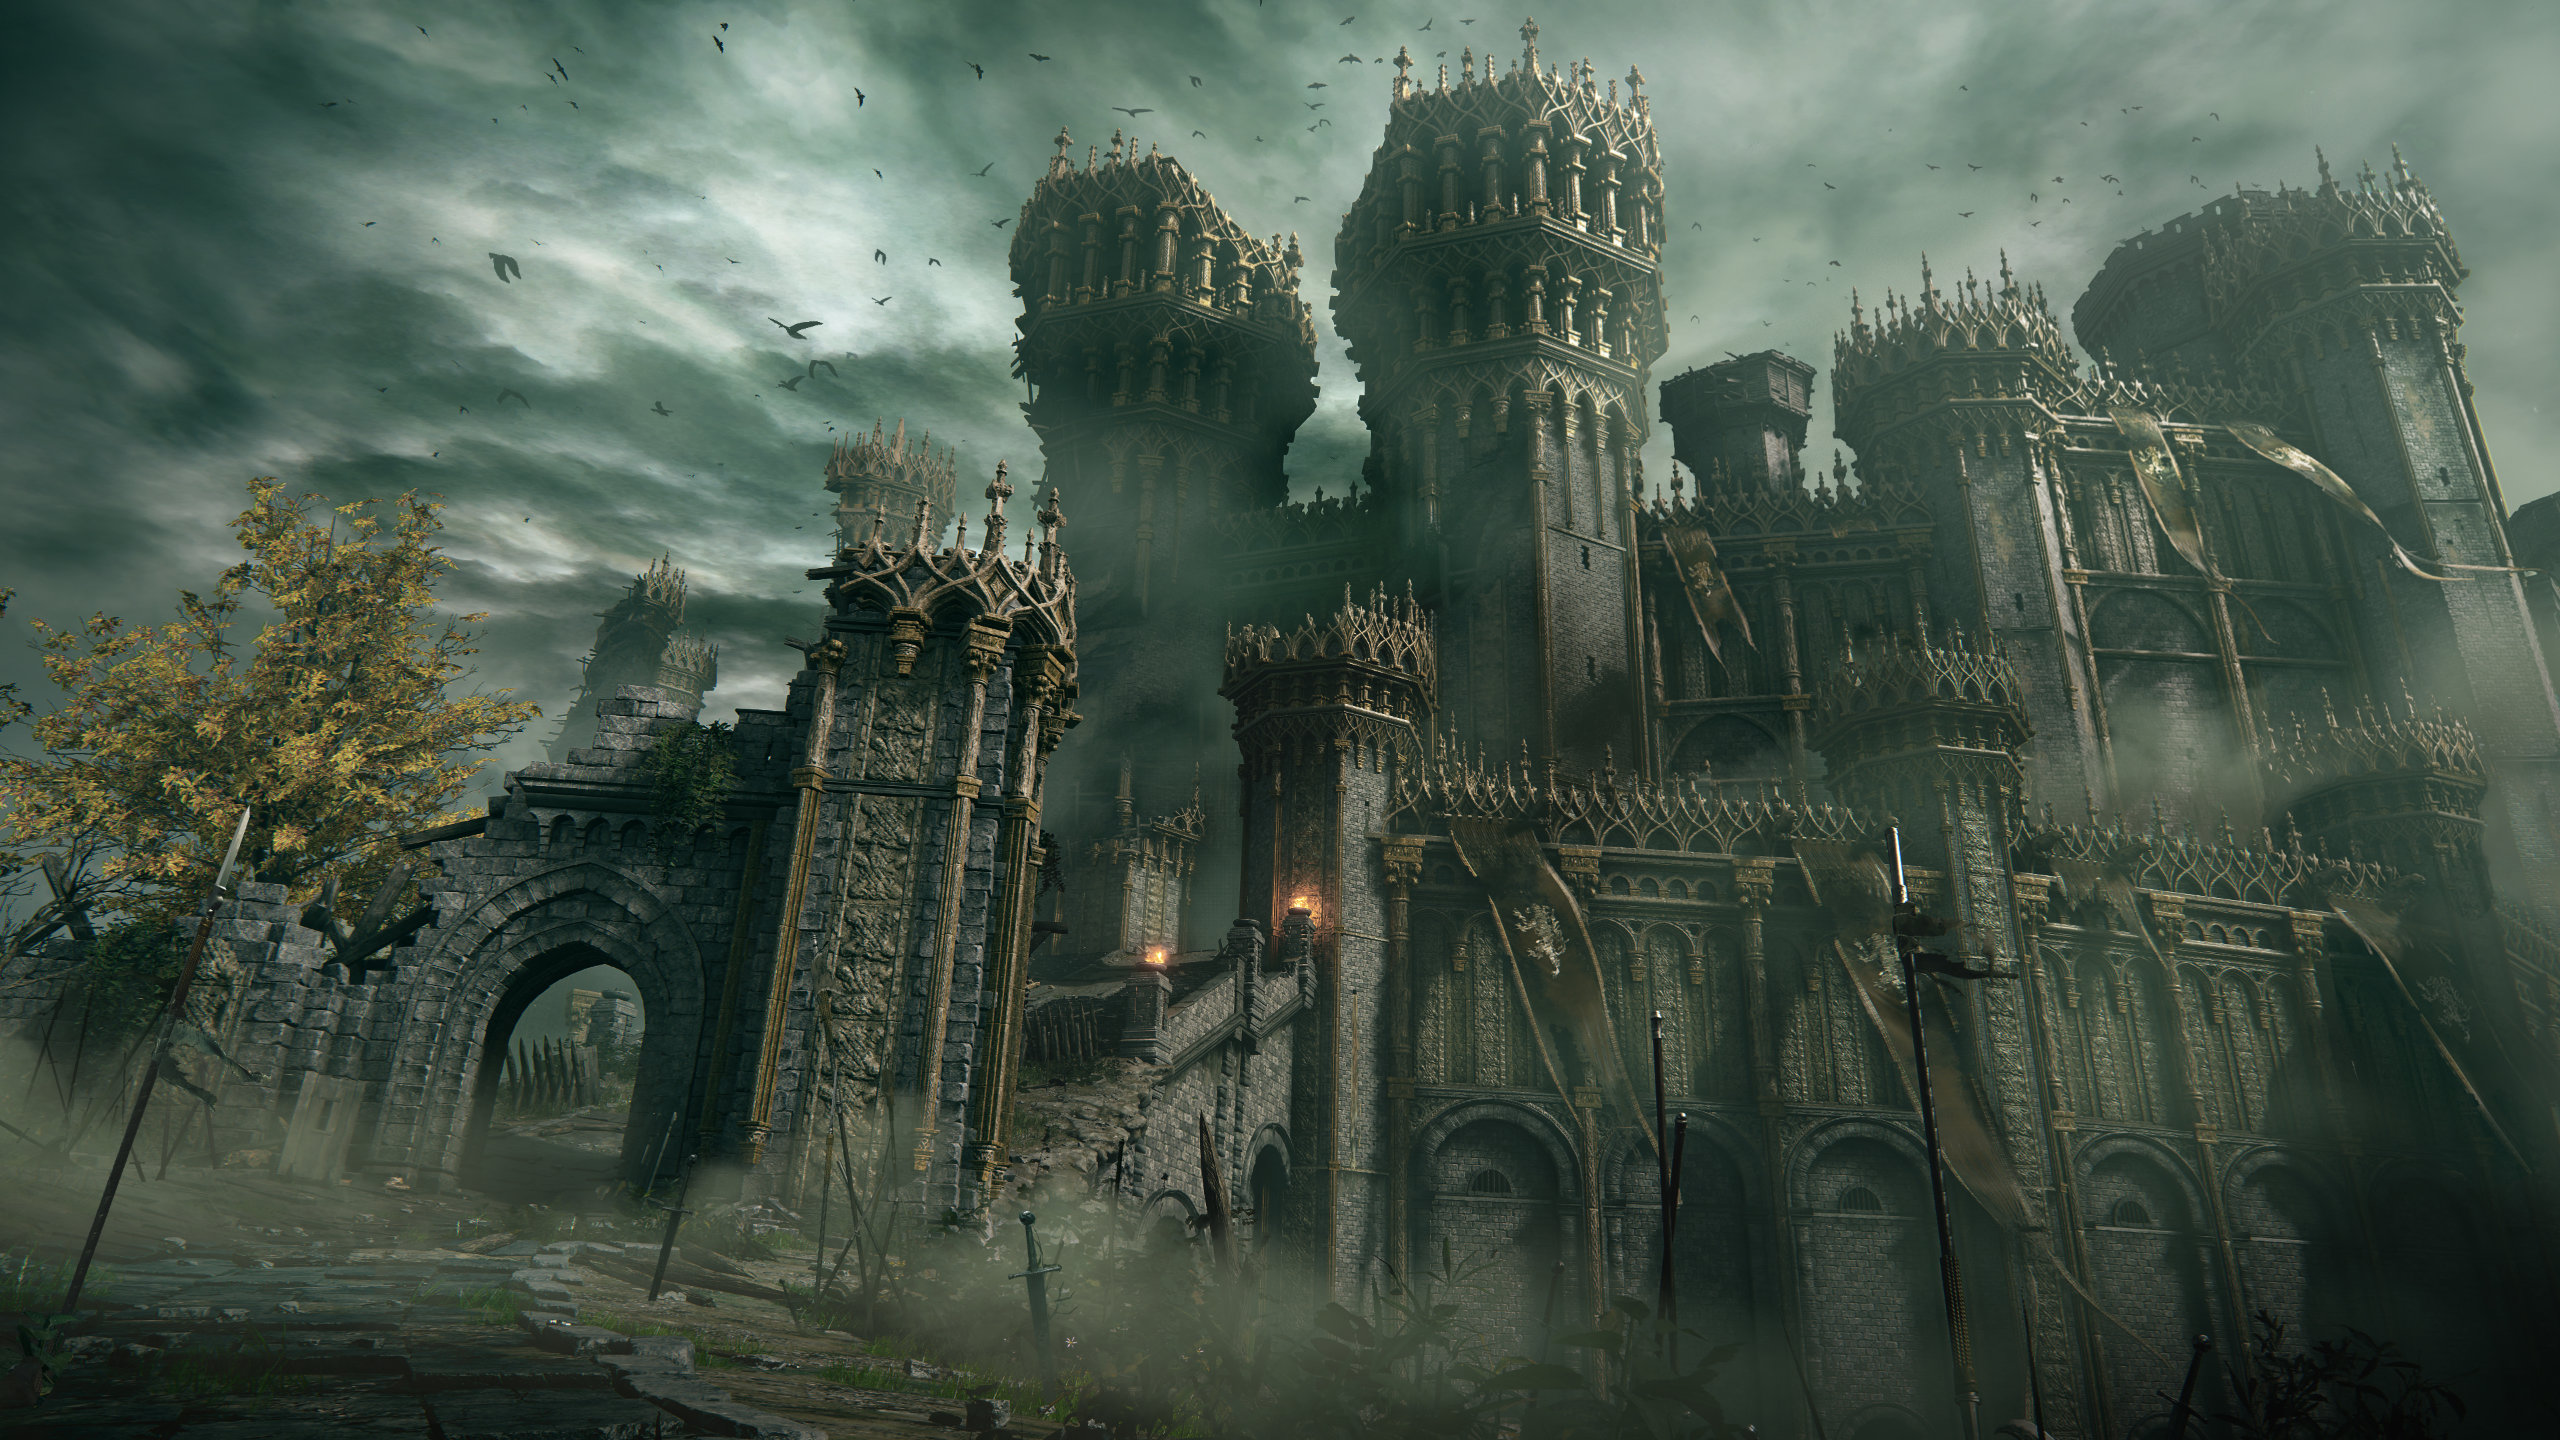 A screenshot of Elden Ring shows an imposing castle with barbed walls that stretch and tower over the protagonist.